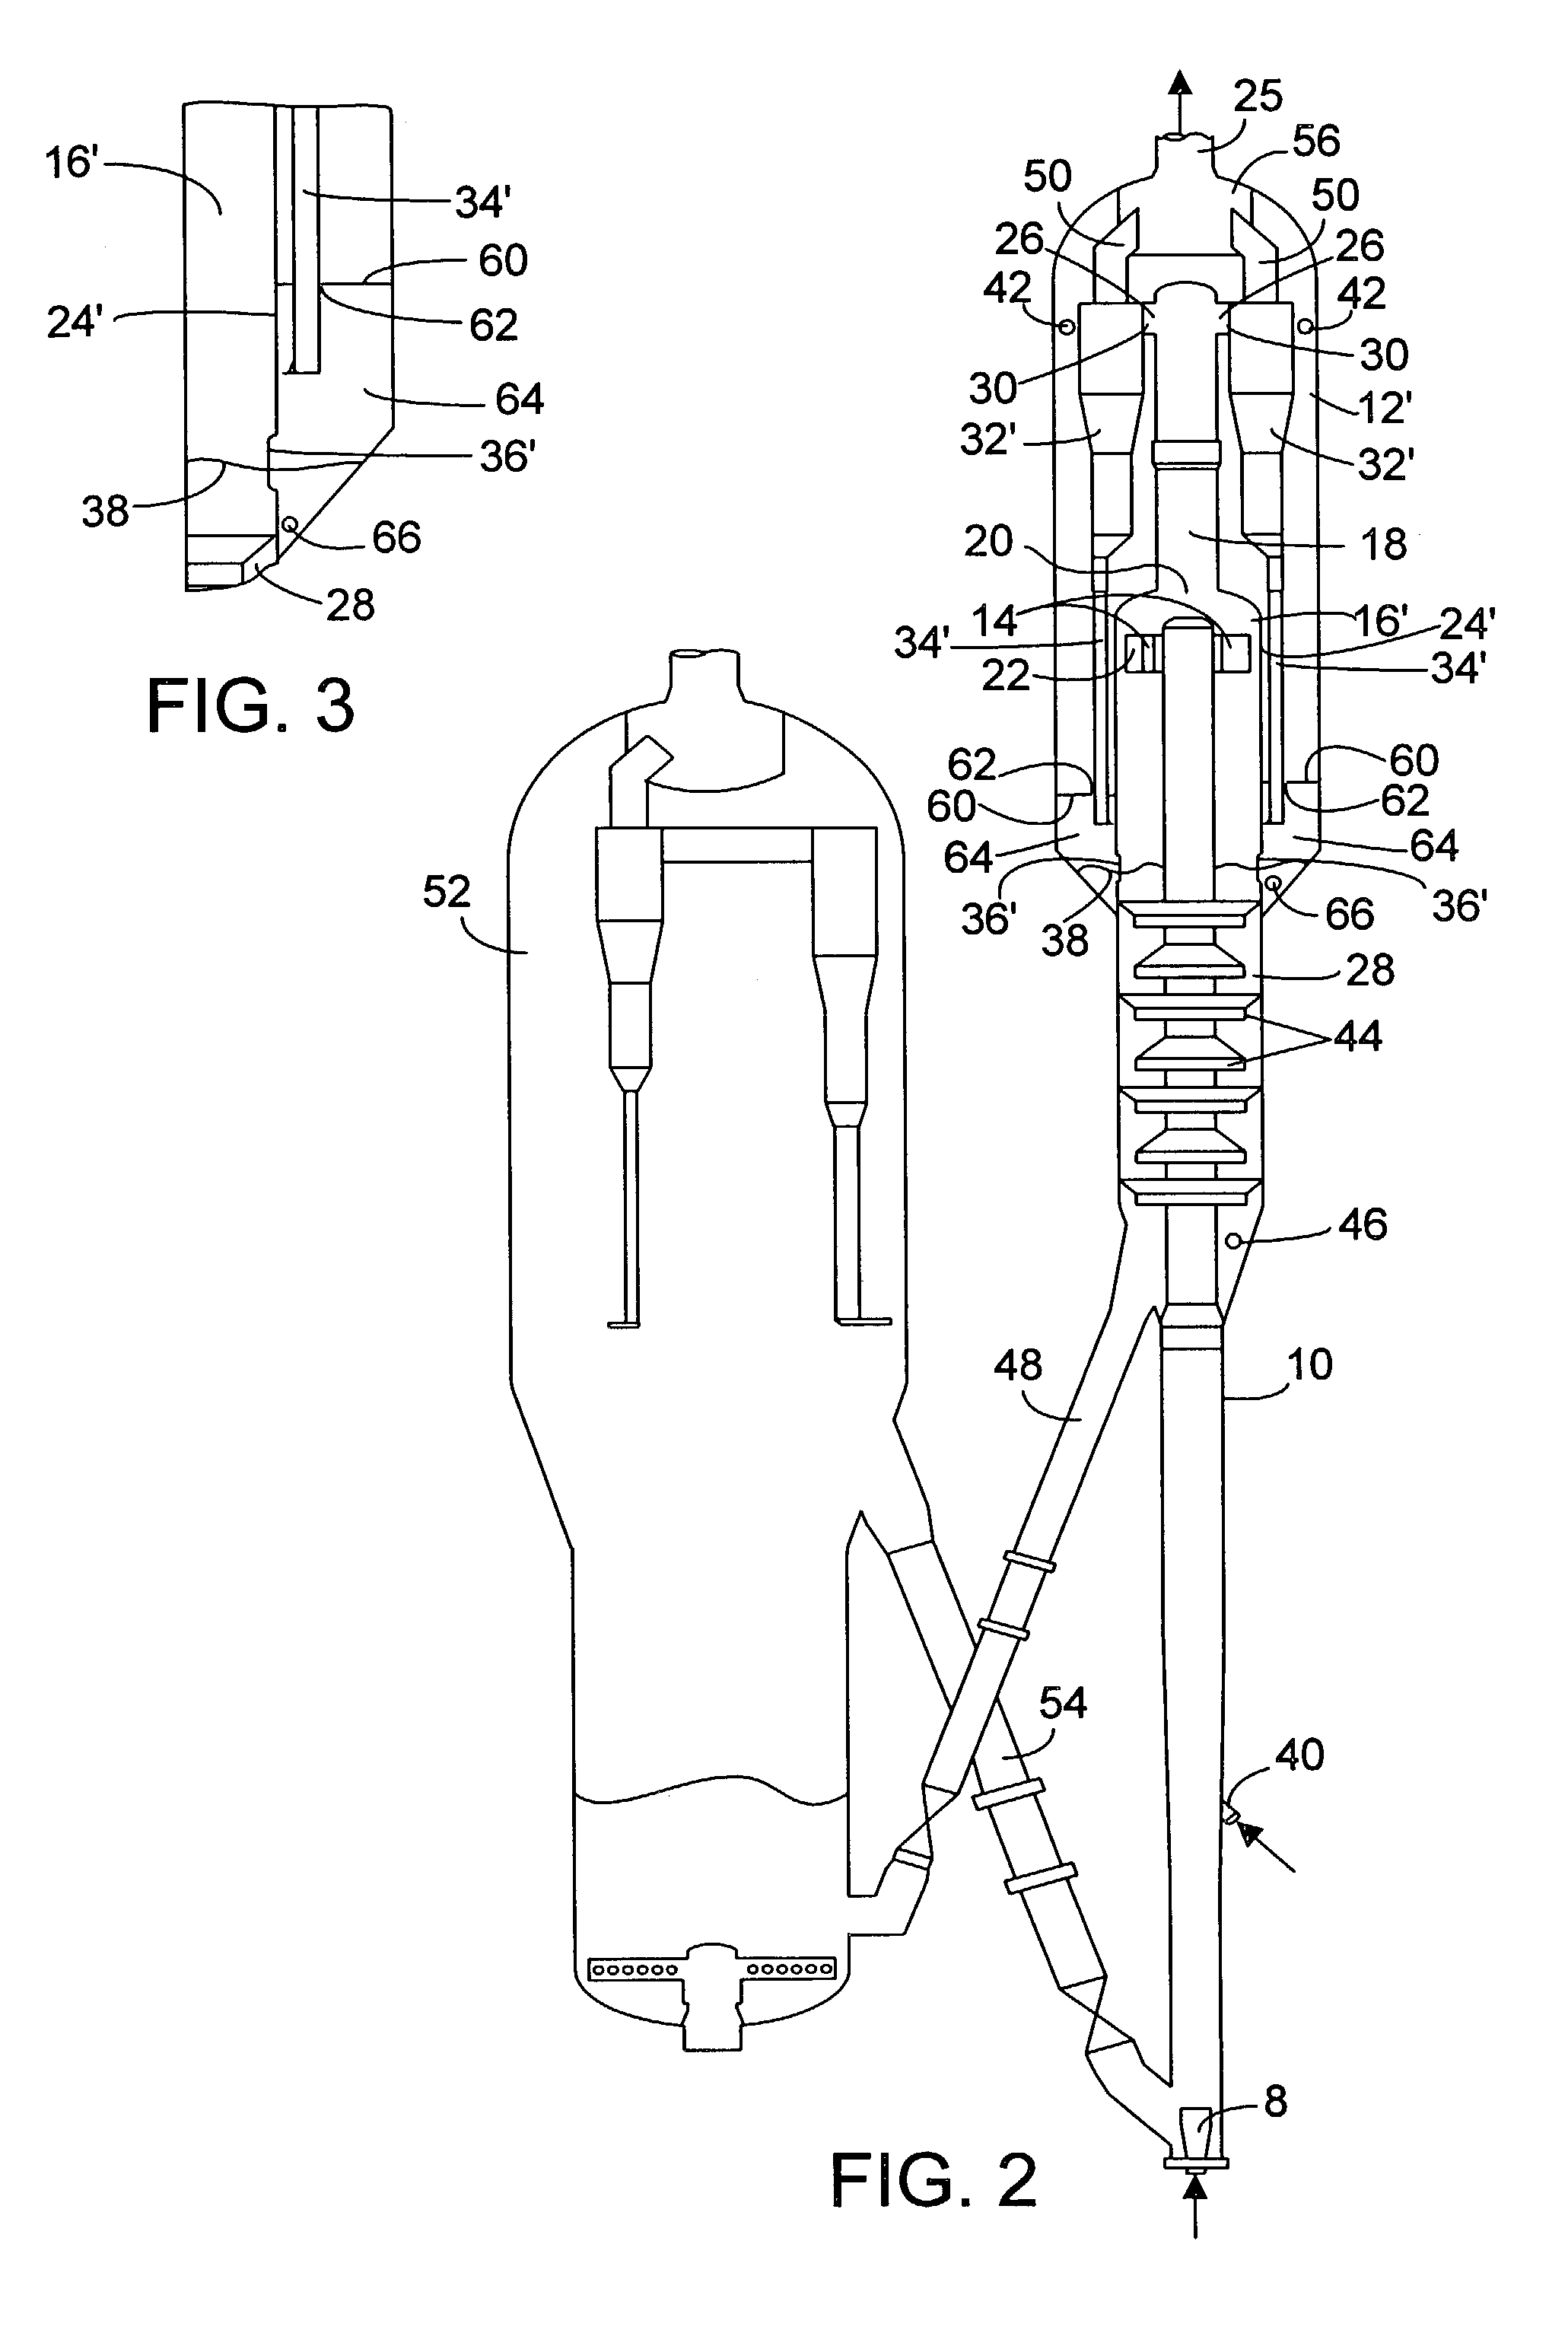 Apparatus and process for minimizing catalyst residence time in a reactor vessel